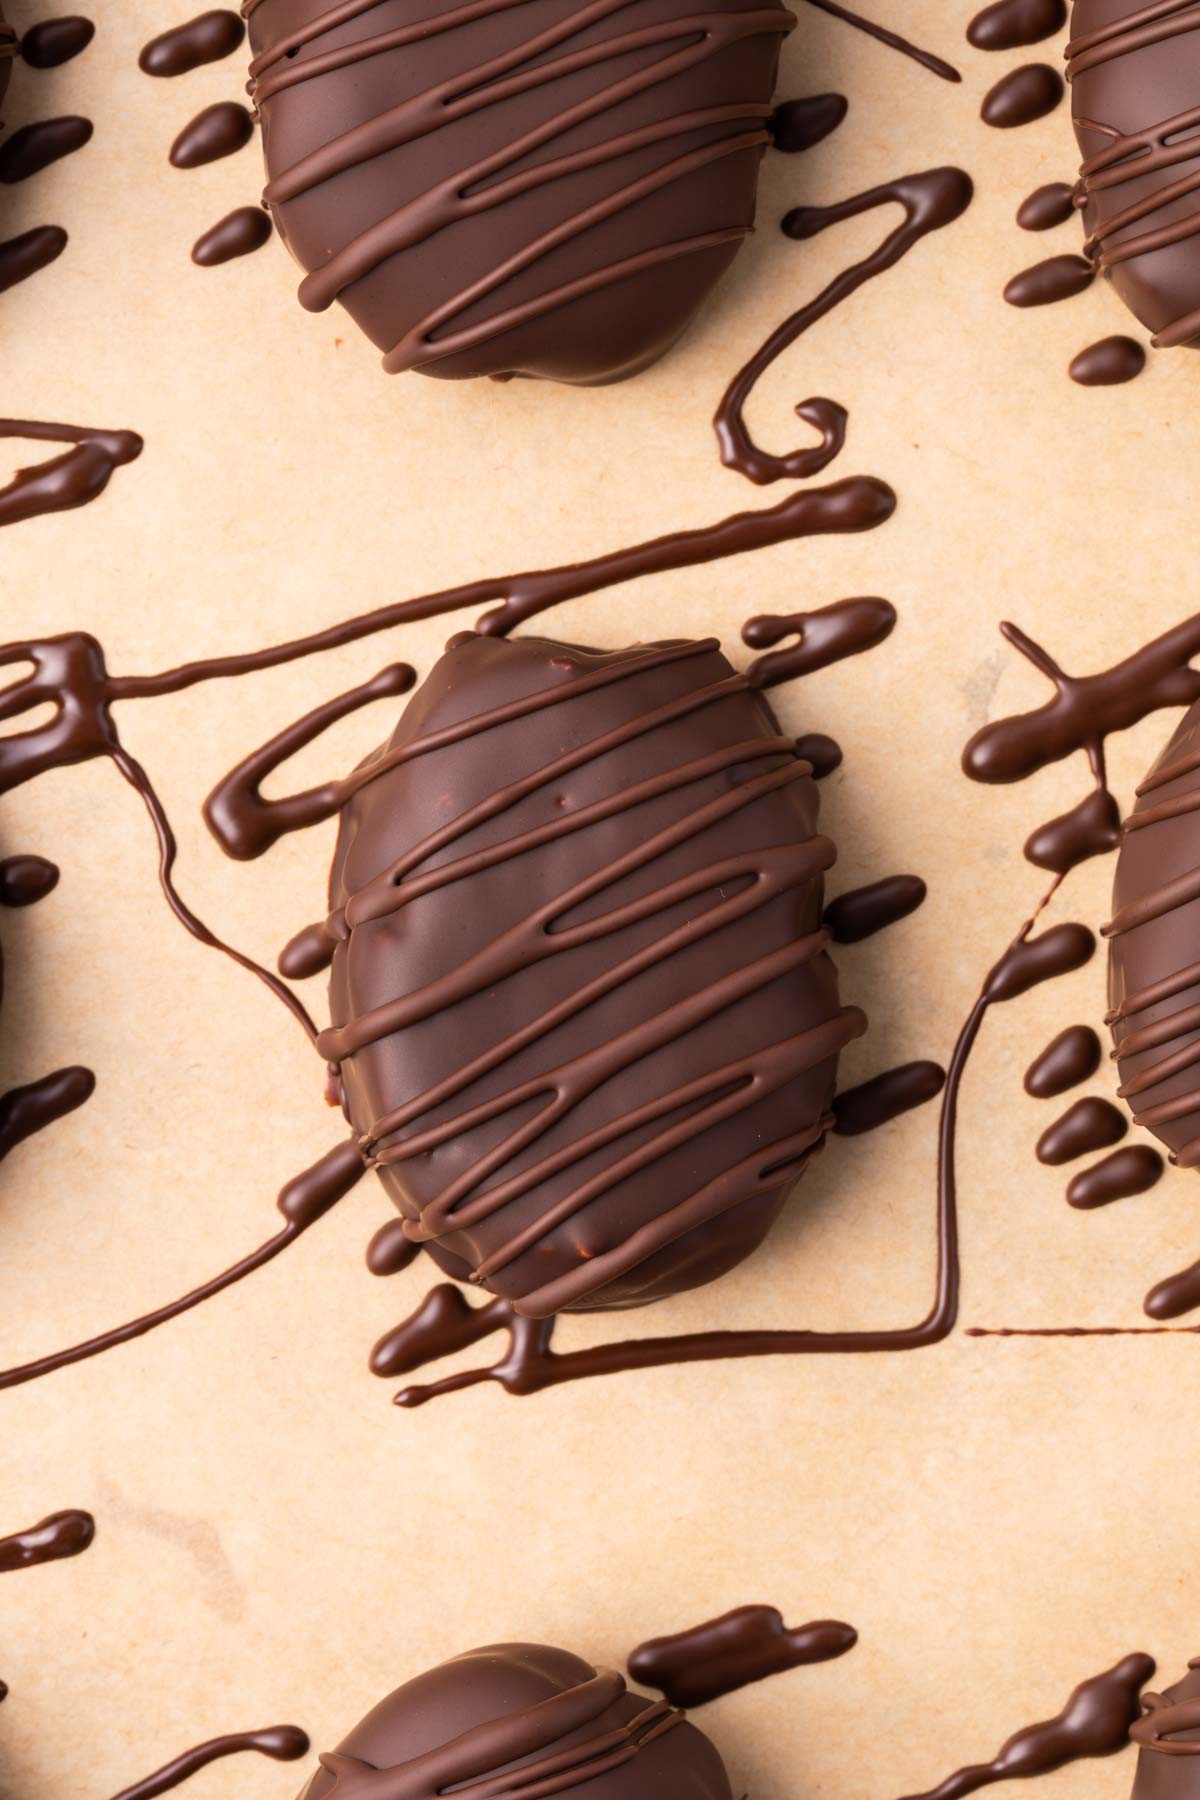 Close up of a chocolate dipped peanut butter egg with chocolate drizzle.